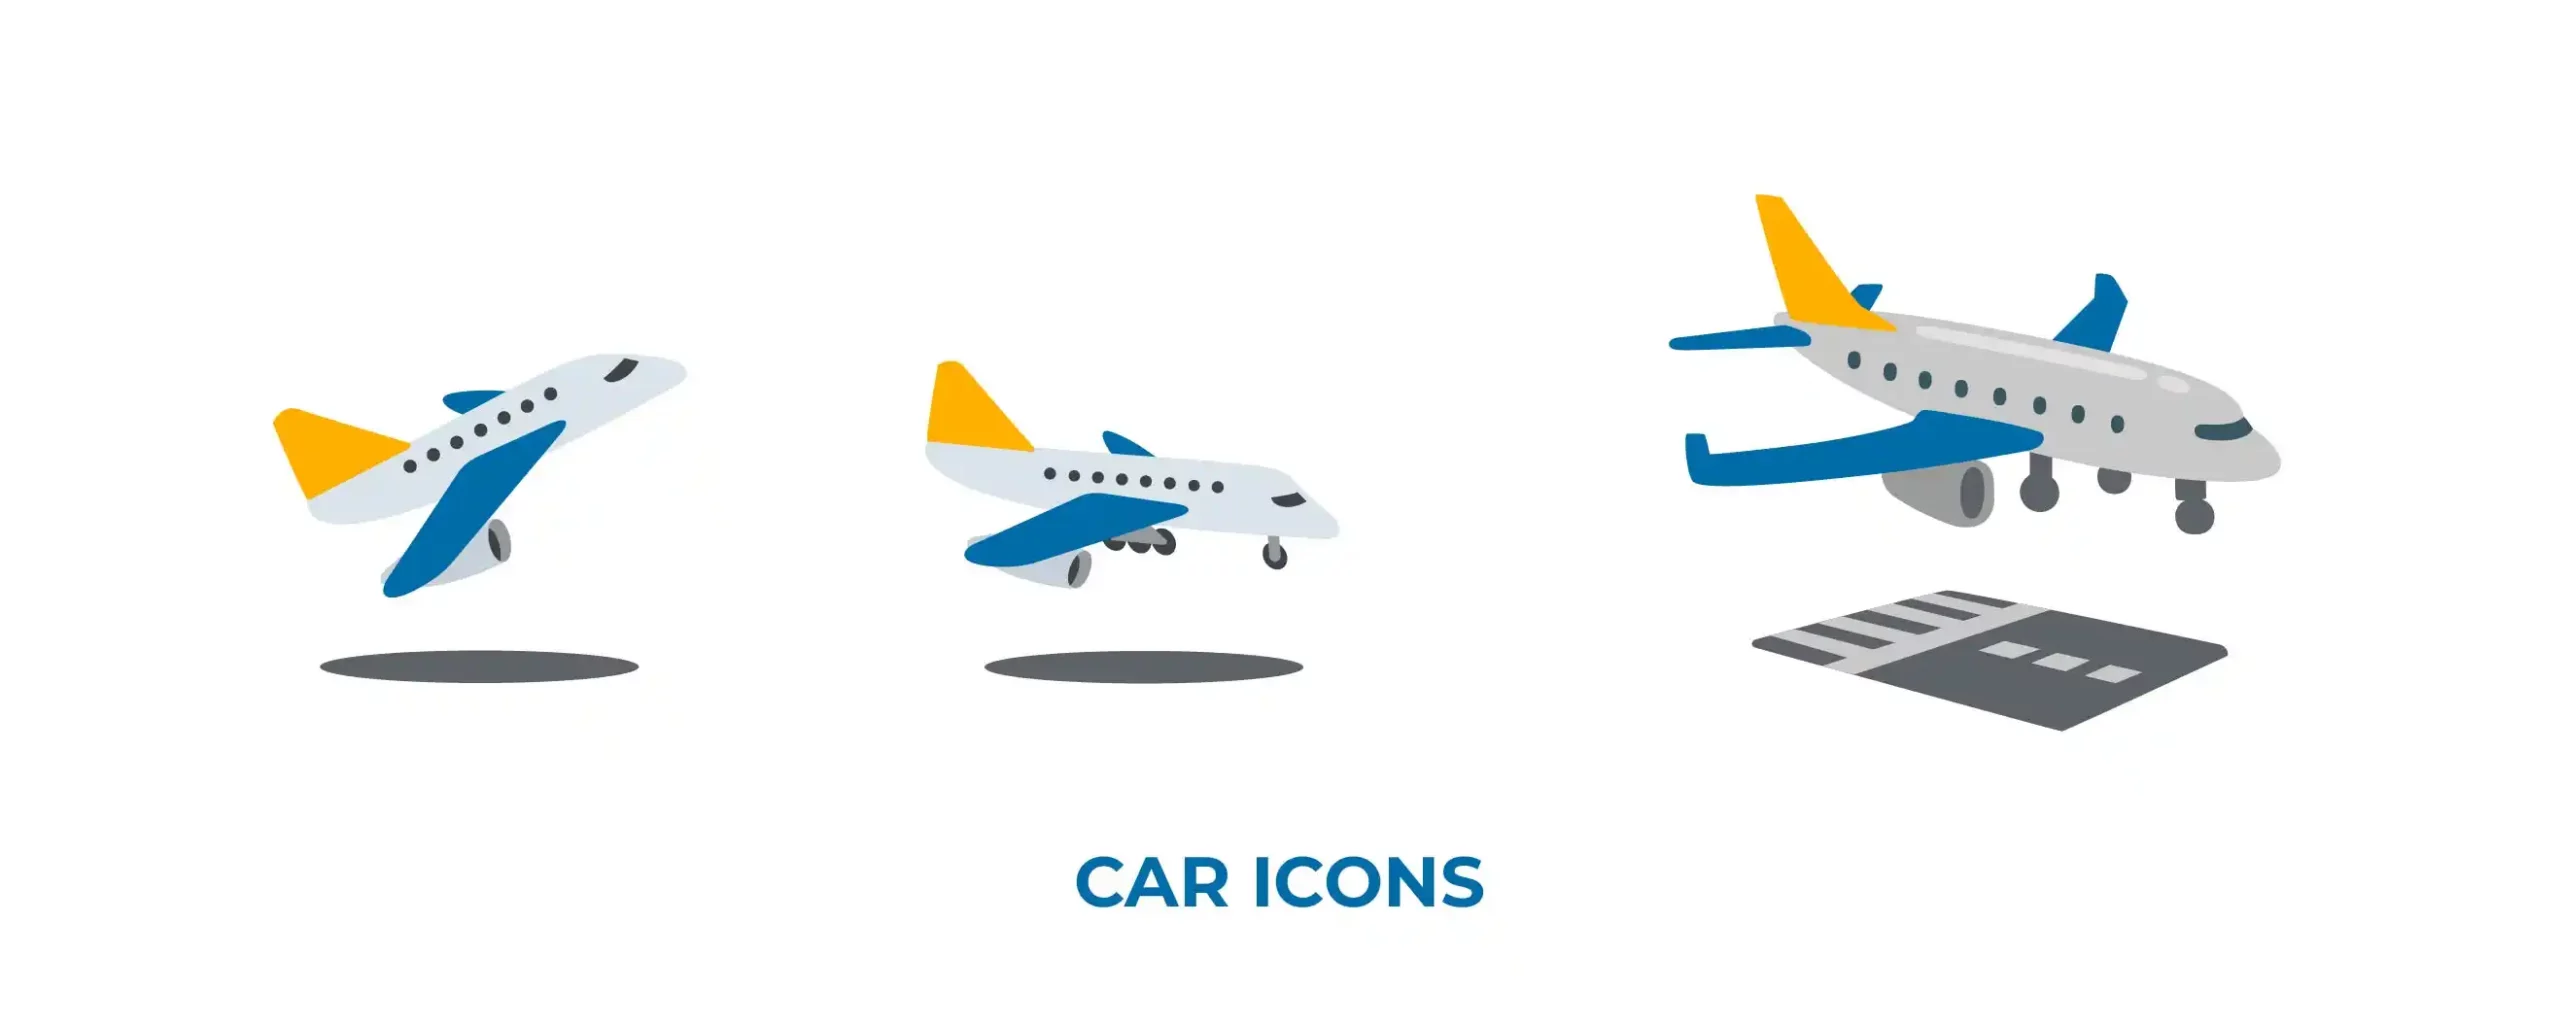 Airplane icons for you